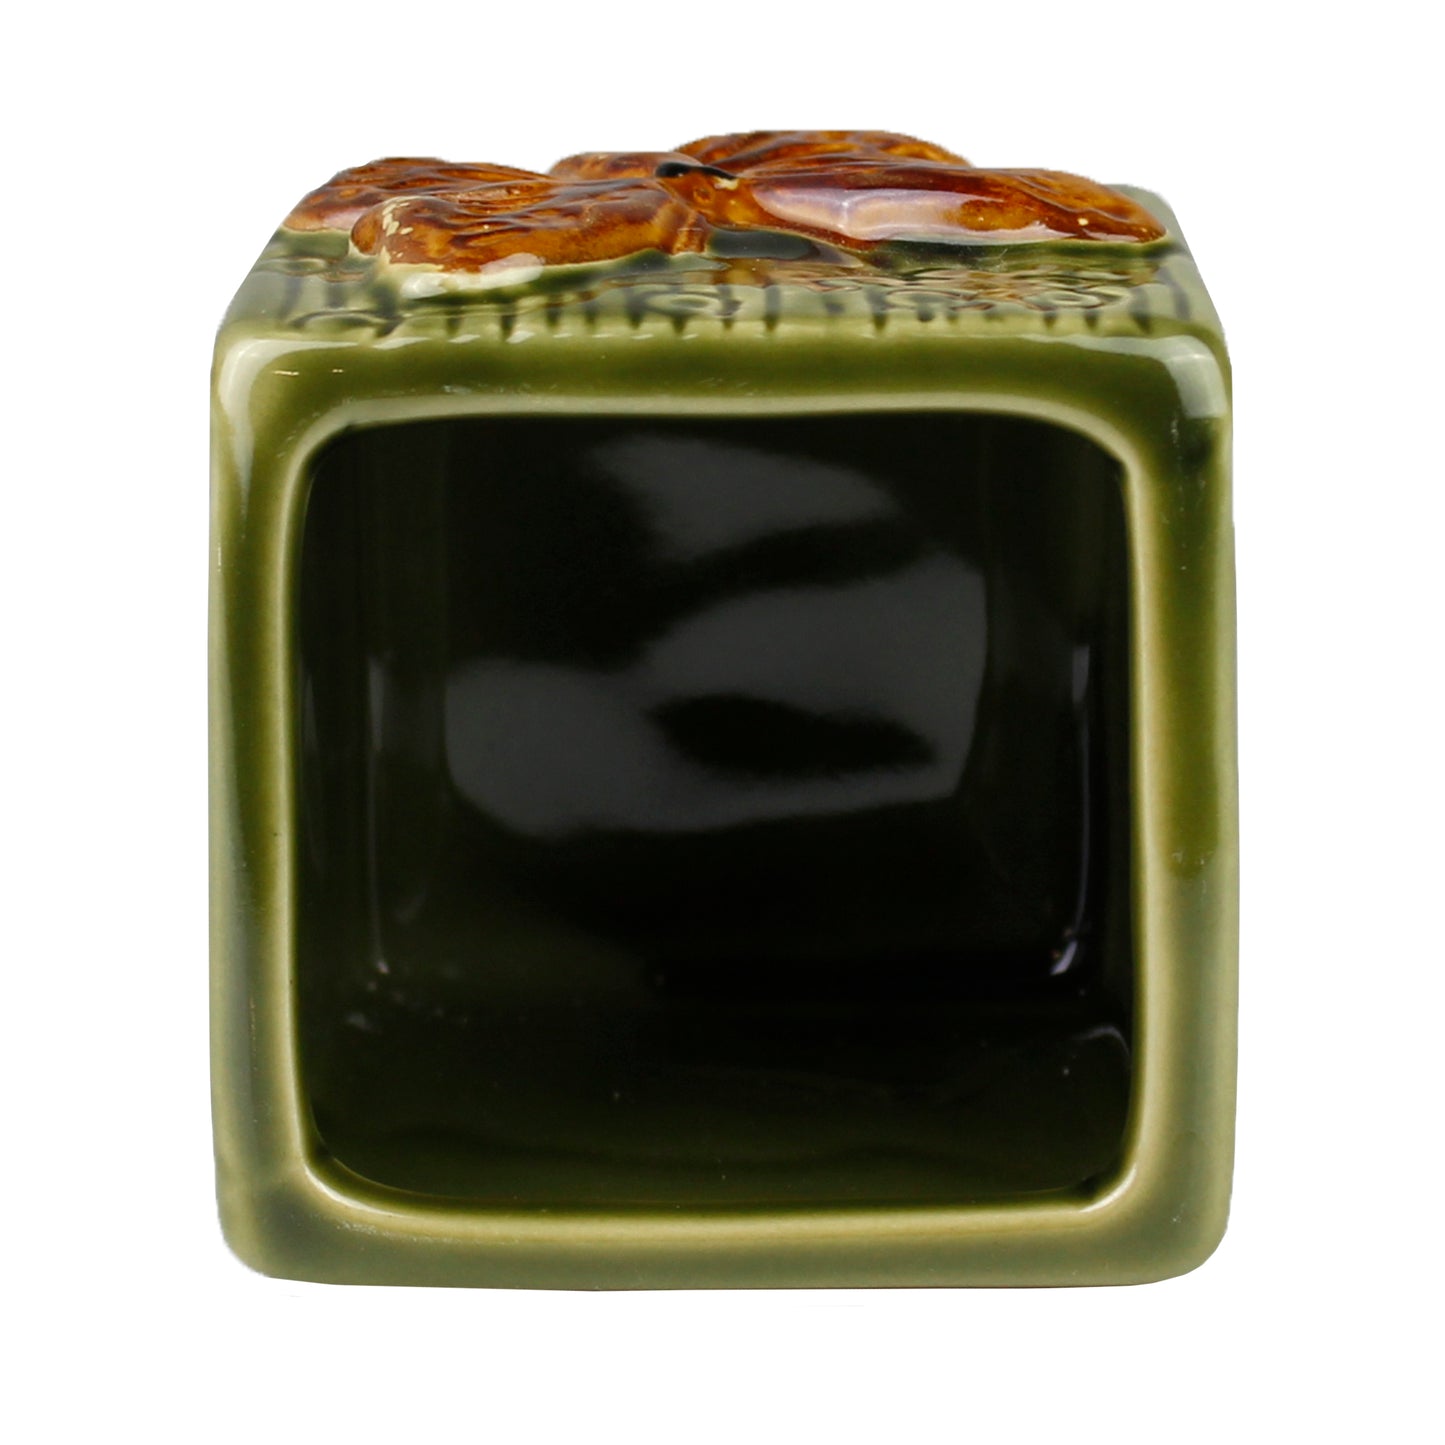 Green Square Butterfly Design Planter Pot